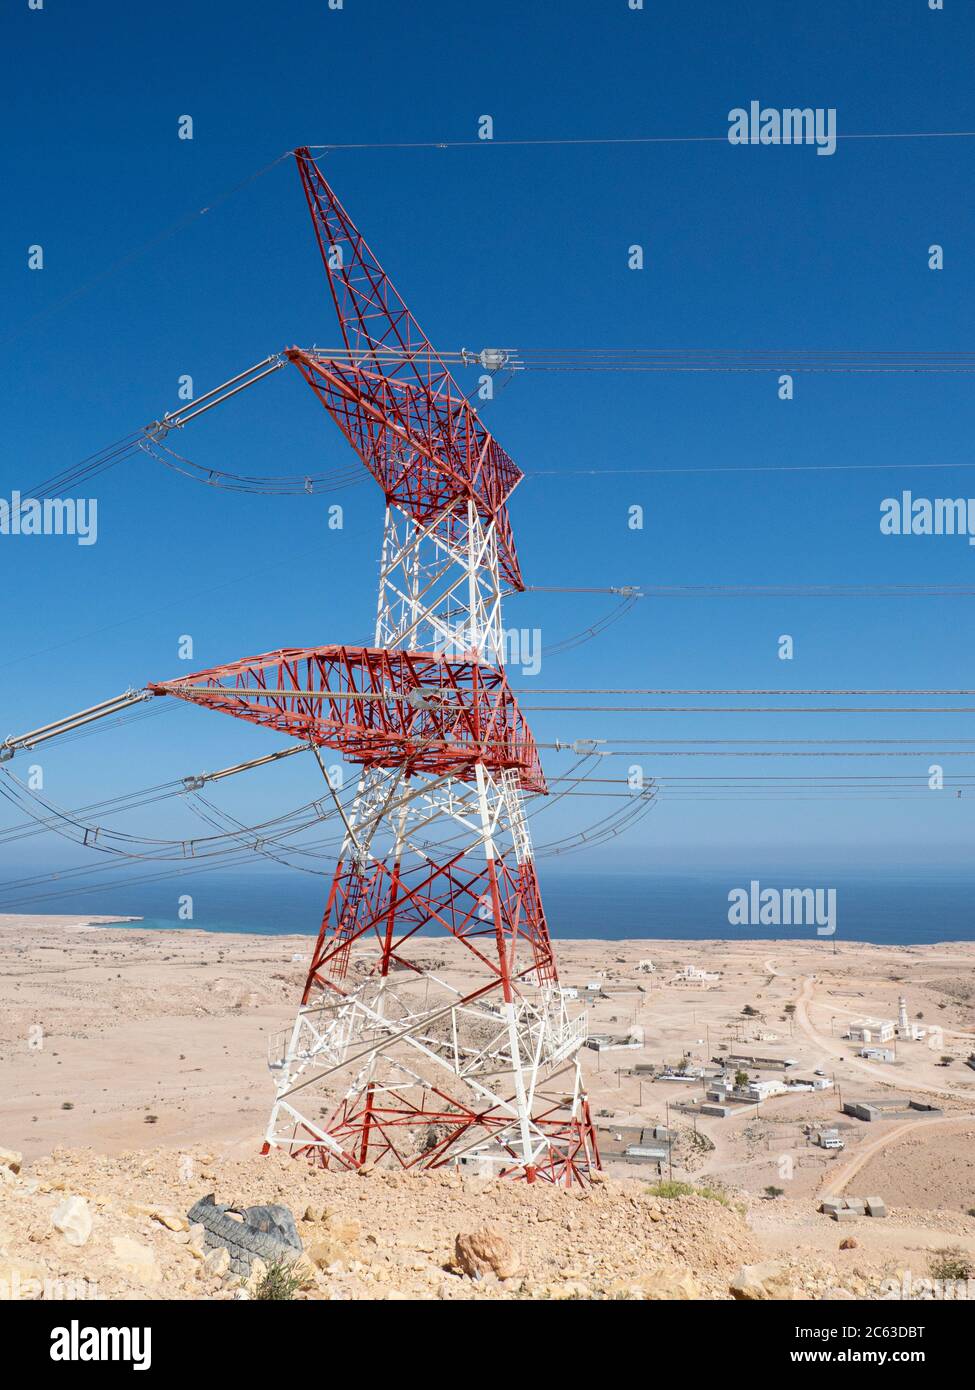 High tension power lines overlooking Wadi Fins, Sultanate of Oman. Stock Photo